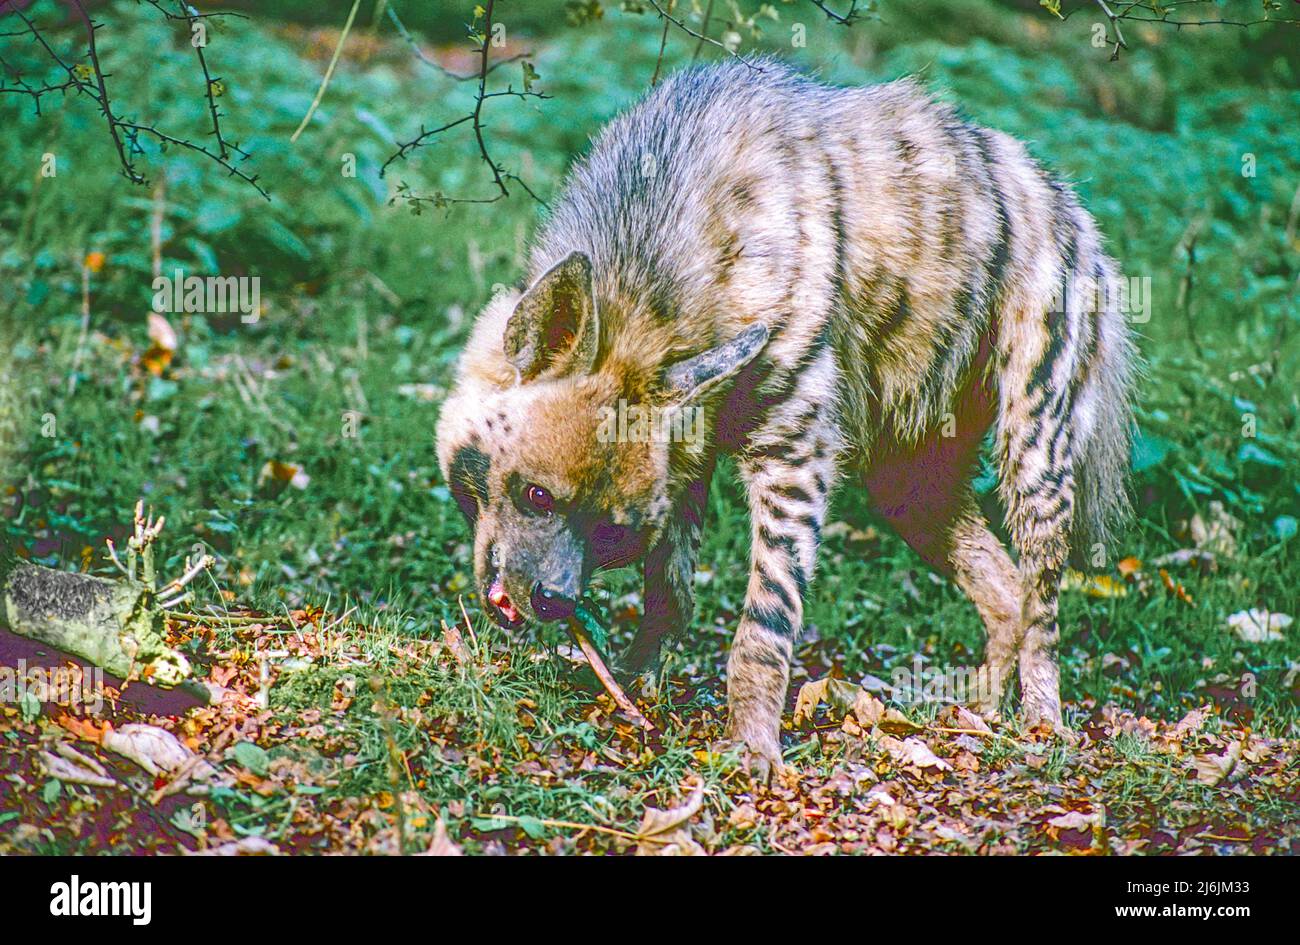 Striped Hyena,  (Hyaena hyaena,) using a stick to sharpen its teeth.  Occurs from North and East Africa, through Middle East to Indian Sub-Continent. Stock Photo